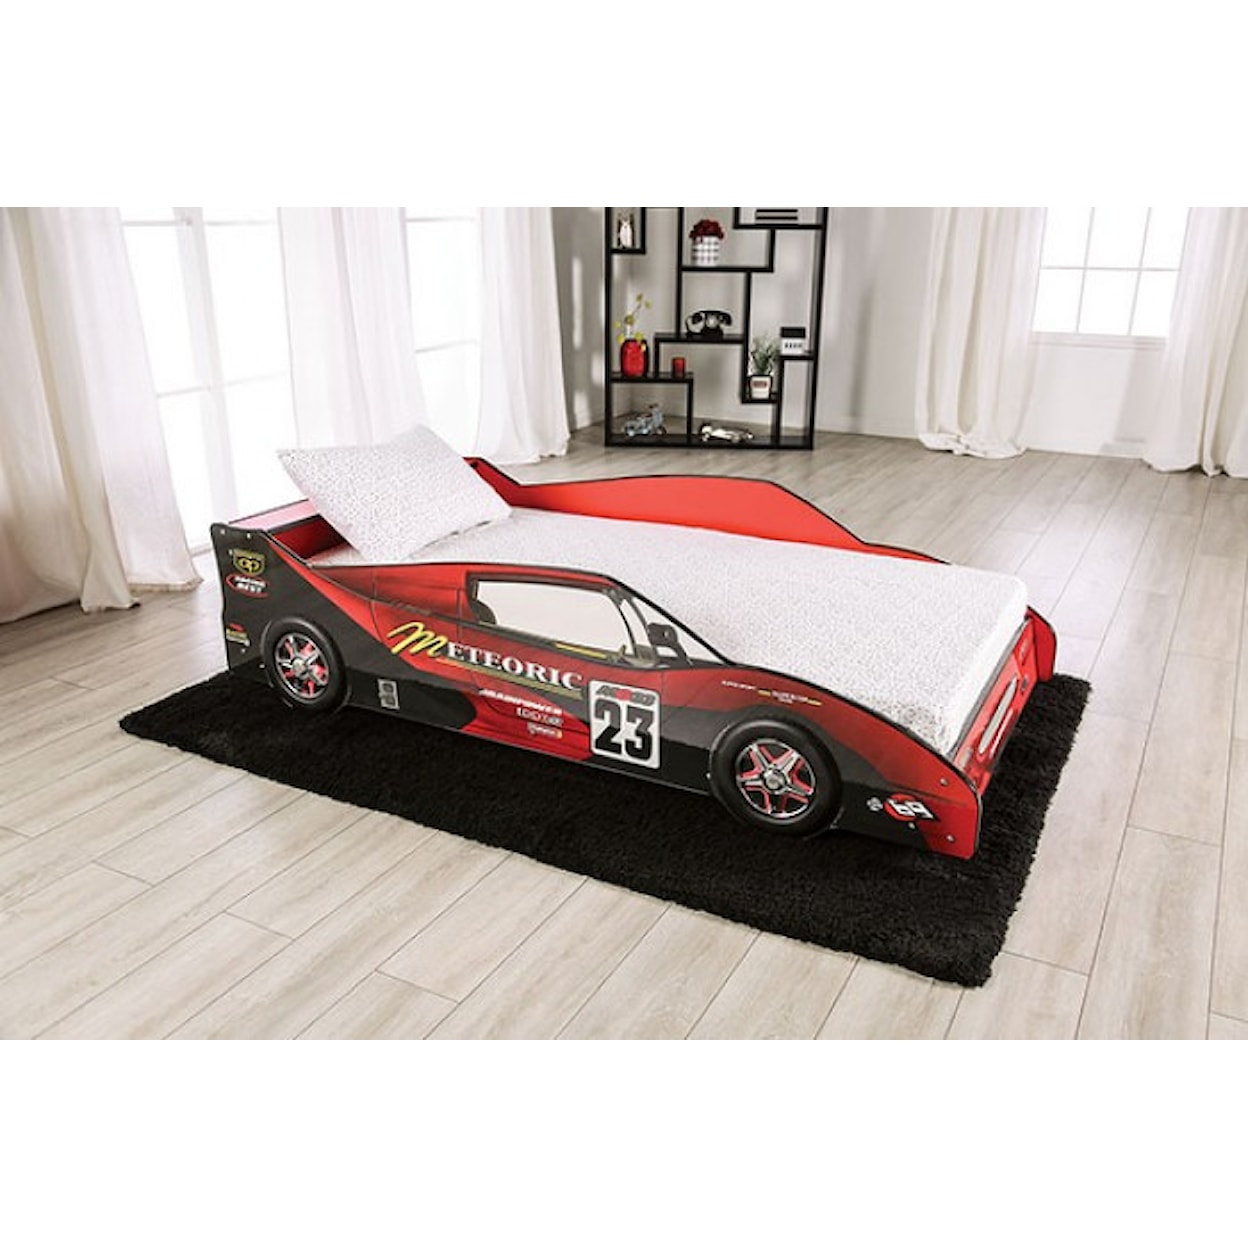 Furniture of America Dustrack Twin Race Car Bed